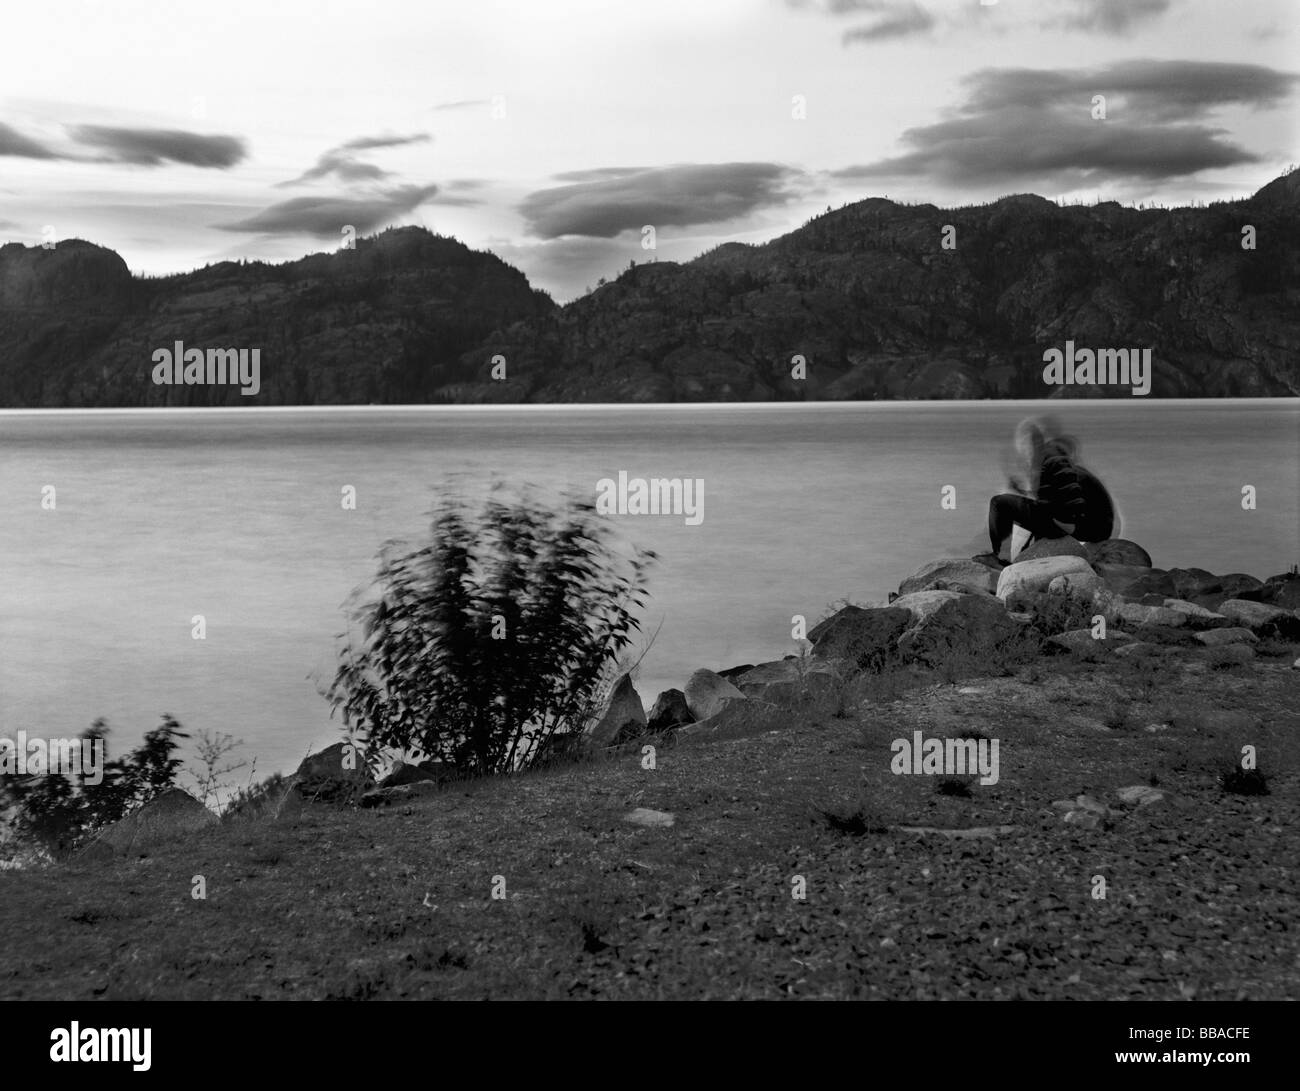 A person sitting at the edge of a lake Stock Photo